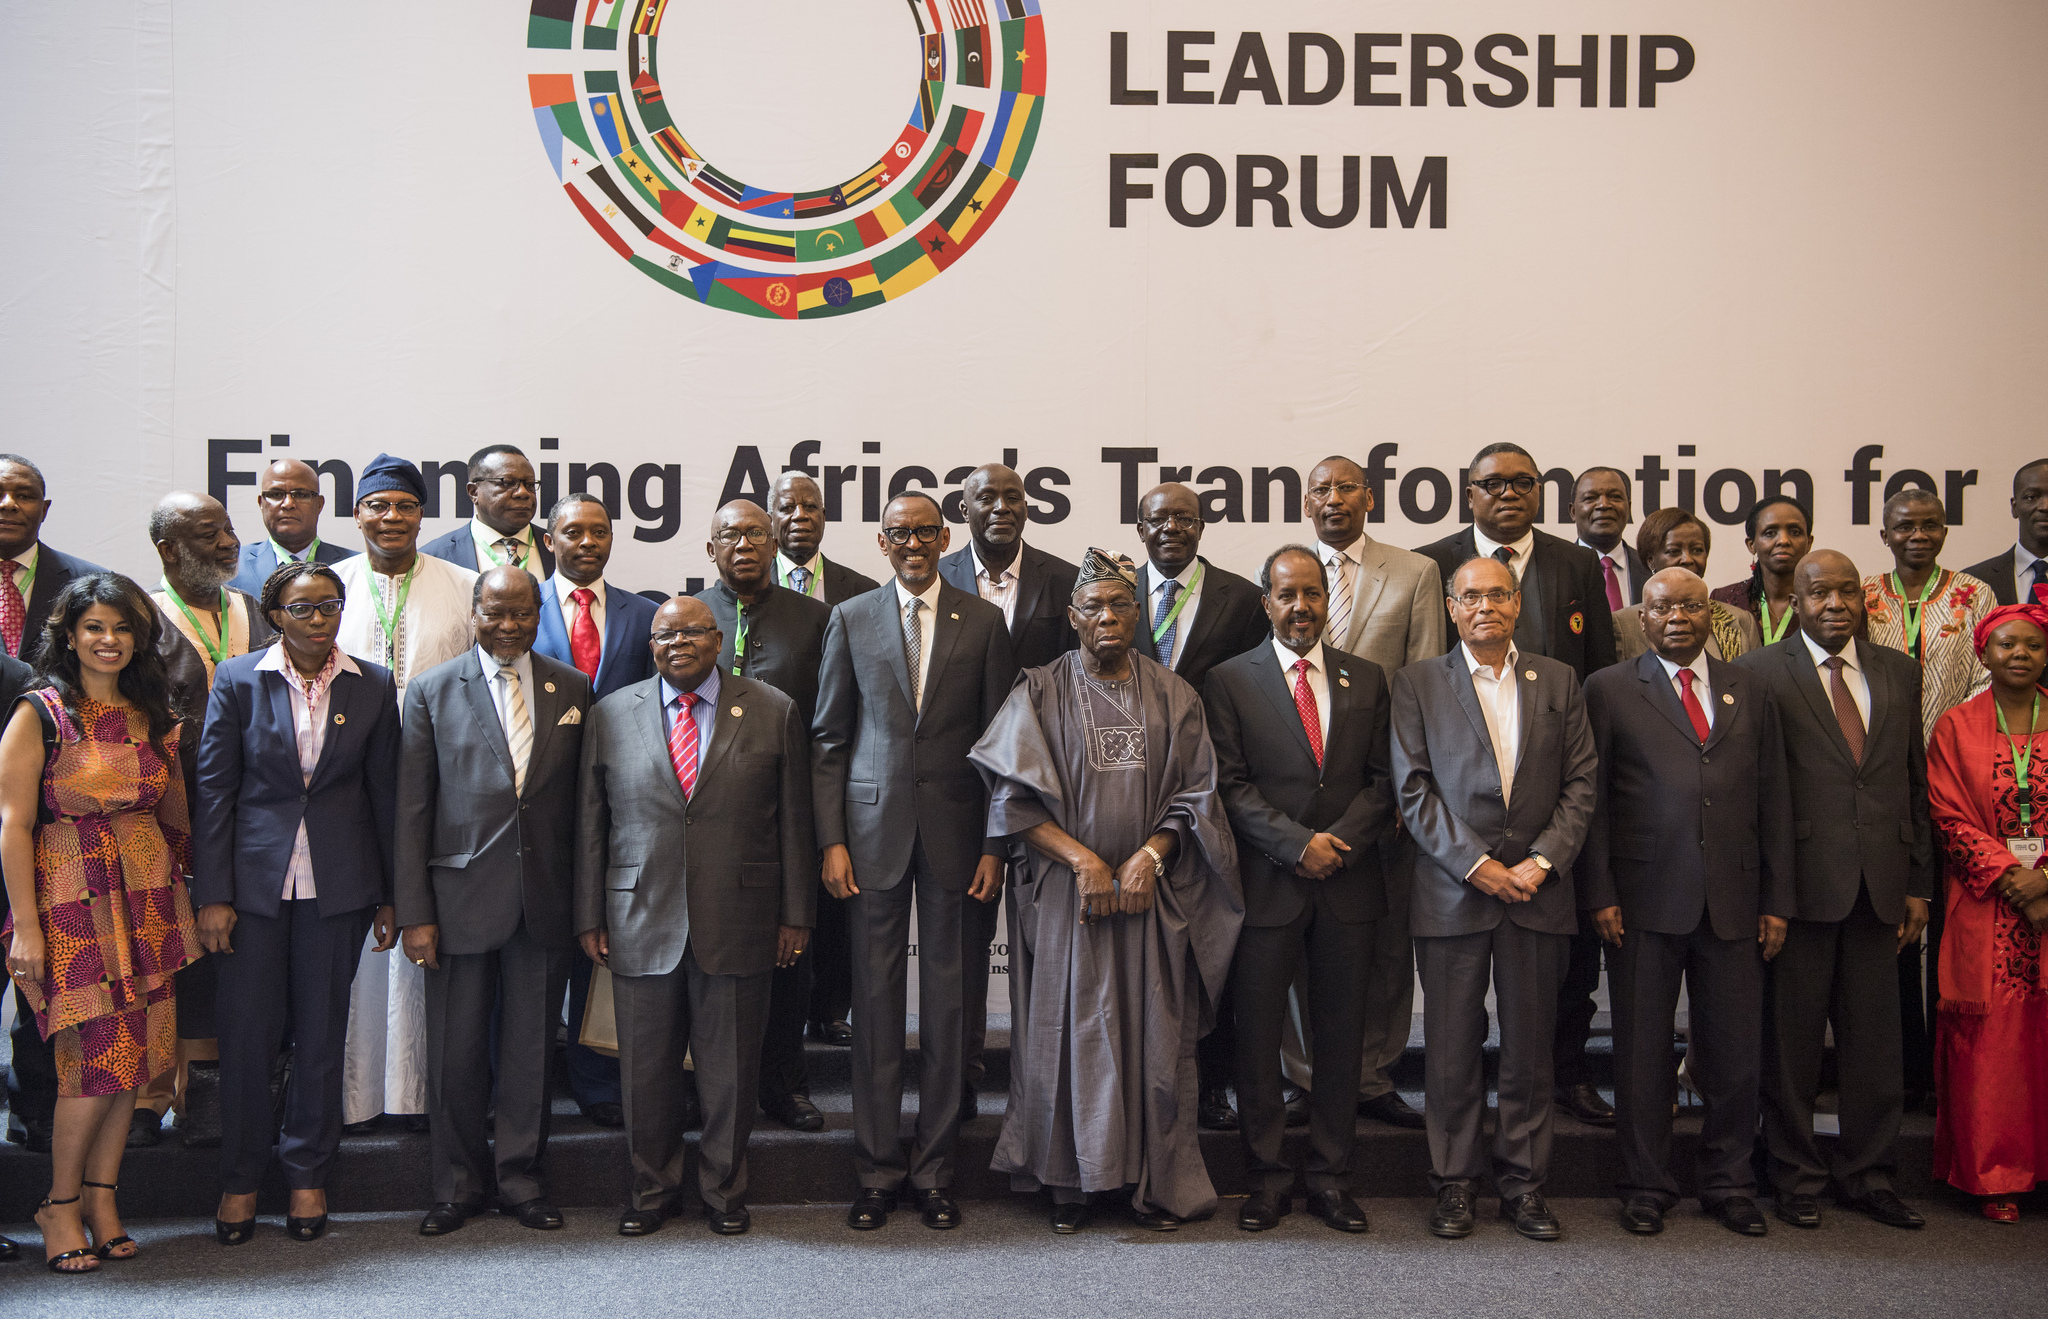 President Kagame, former African Heads of State and other leaders and delegates pose for a group photo after the opening of the African Leadership Forum in Kigali yesterday. Village Urugwiro.